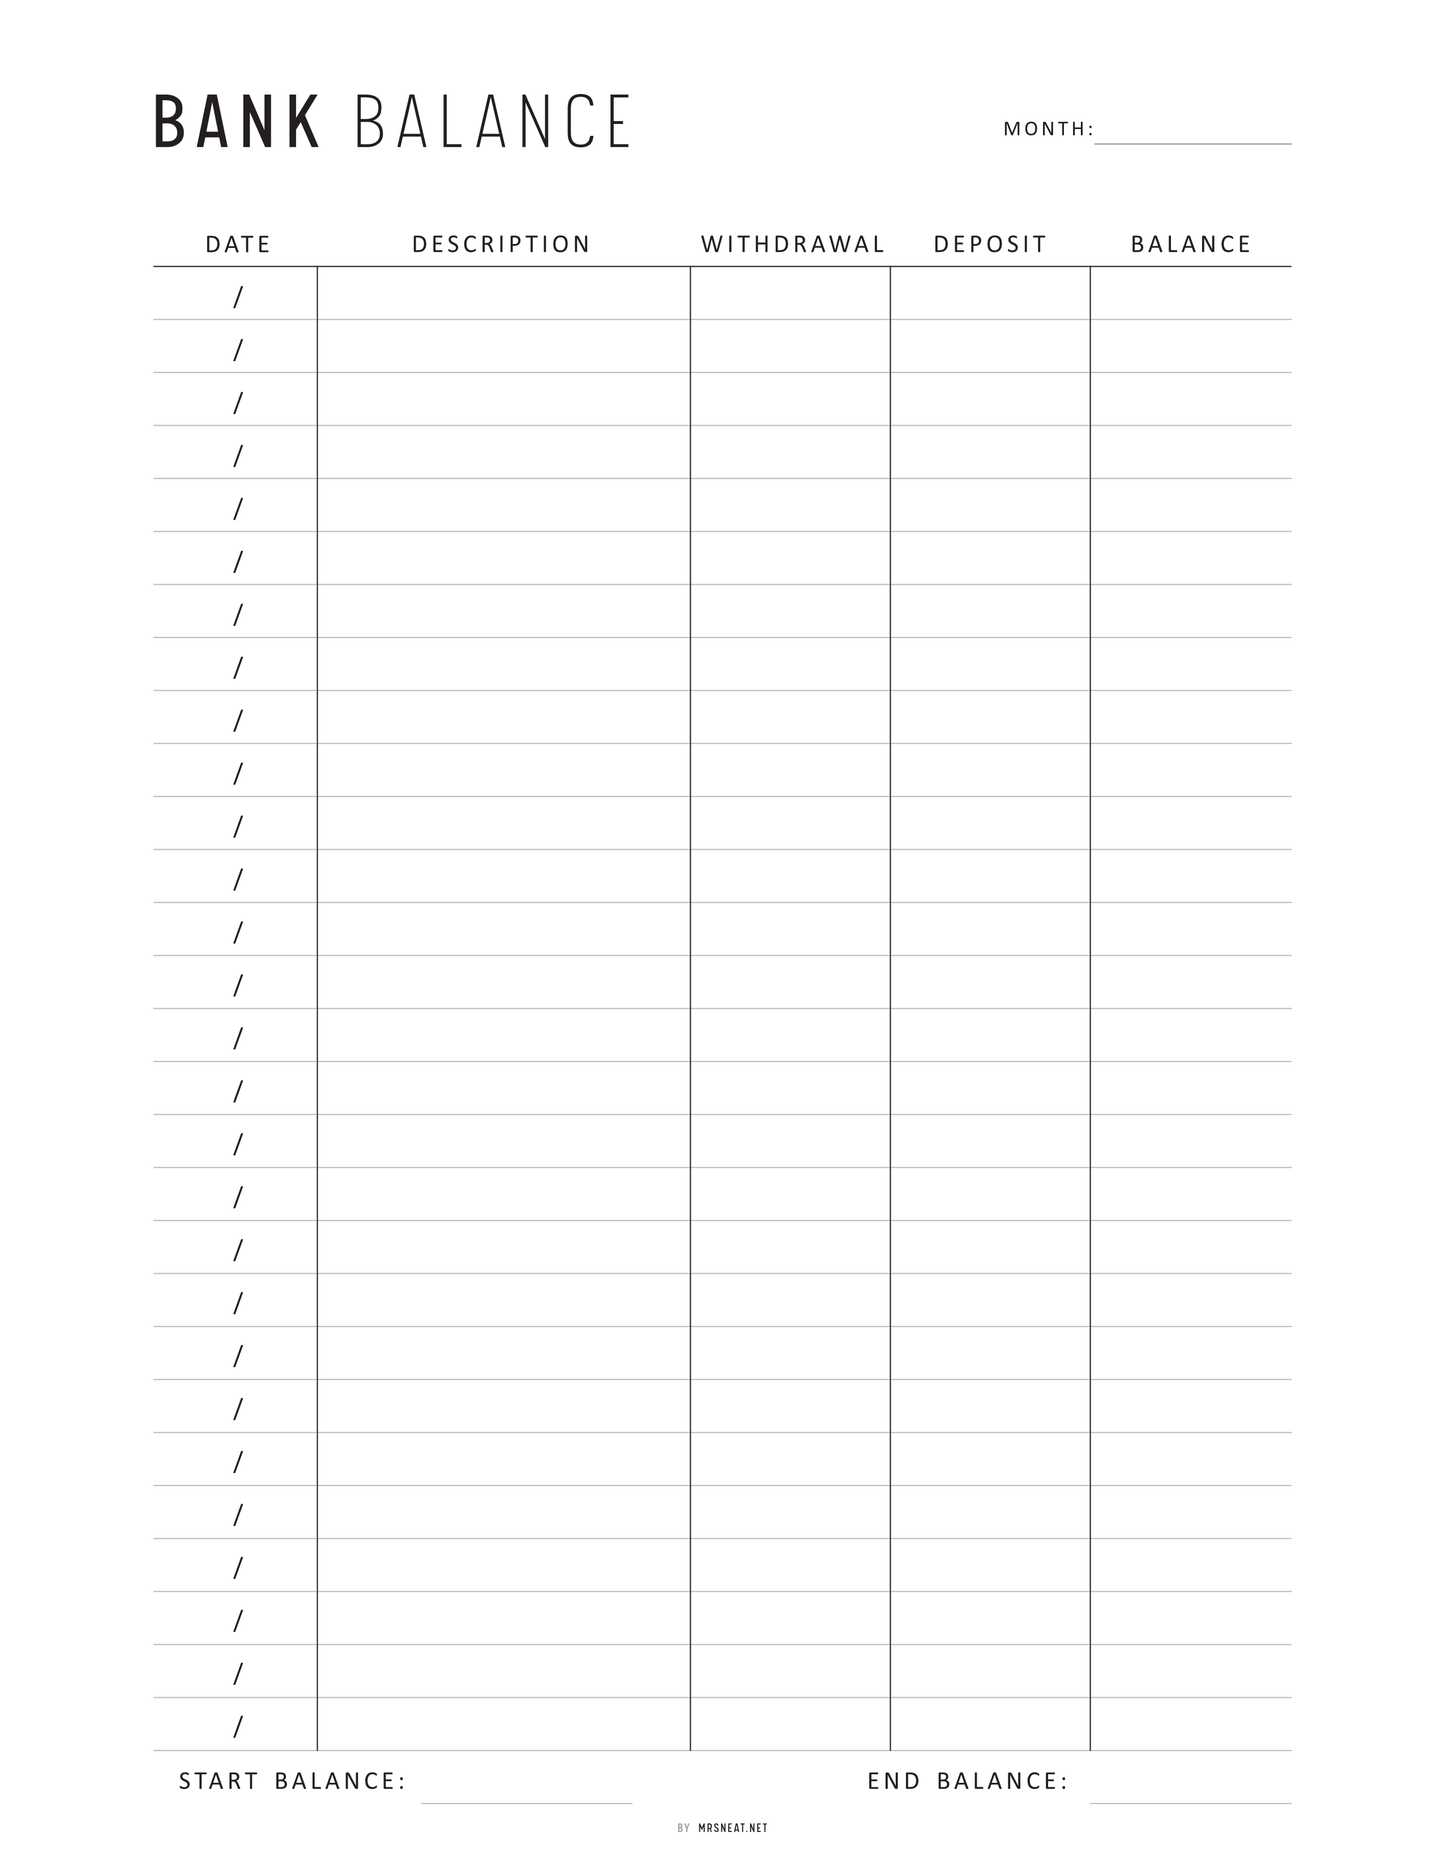 Bank Balance Sheet, Printable, A4, A5, Letter, Half Letter, Colorful and Minimalist Page